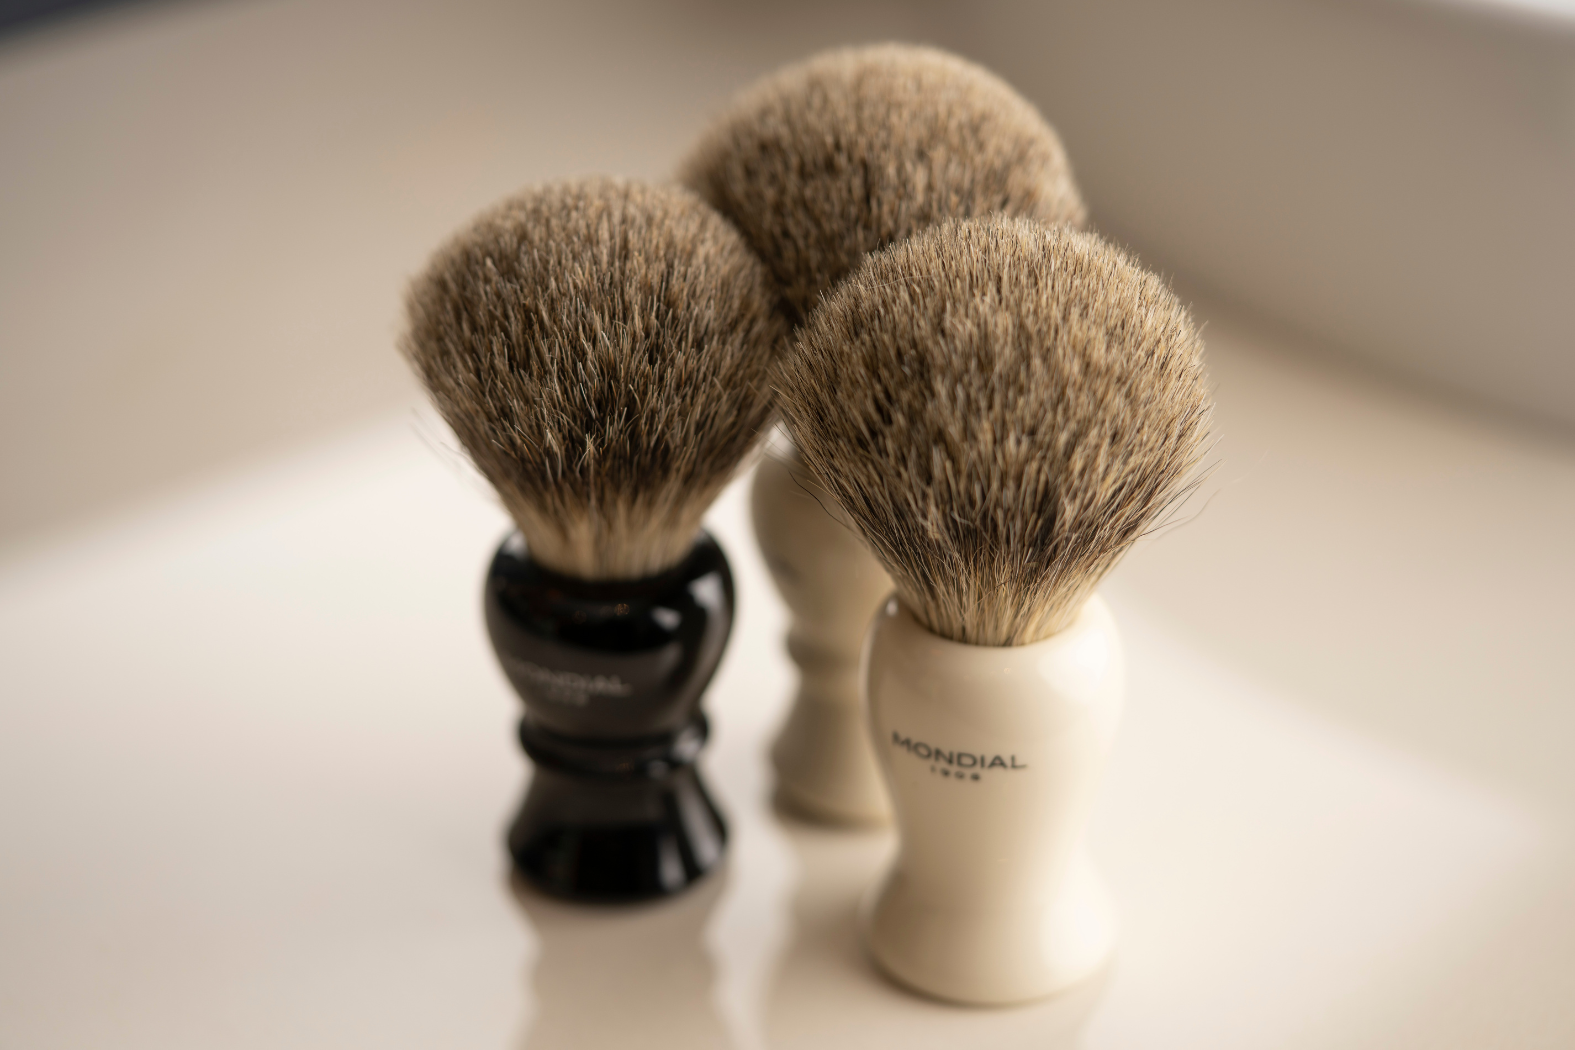 How to Care For A Badger Shaving Brush (And Why It's Worth It!)